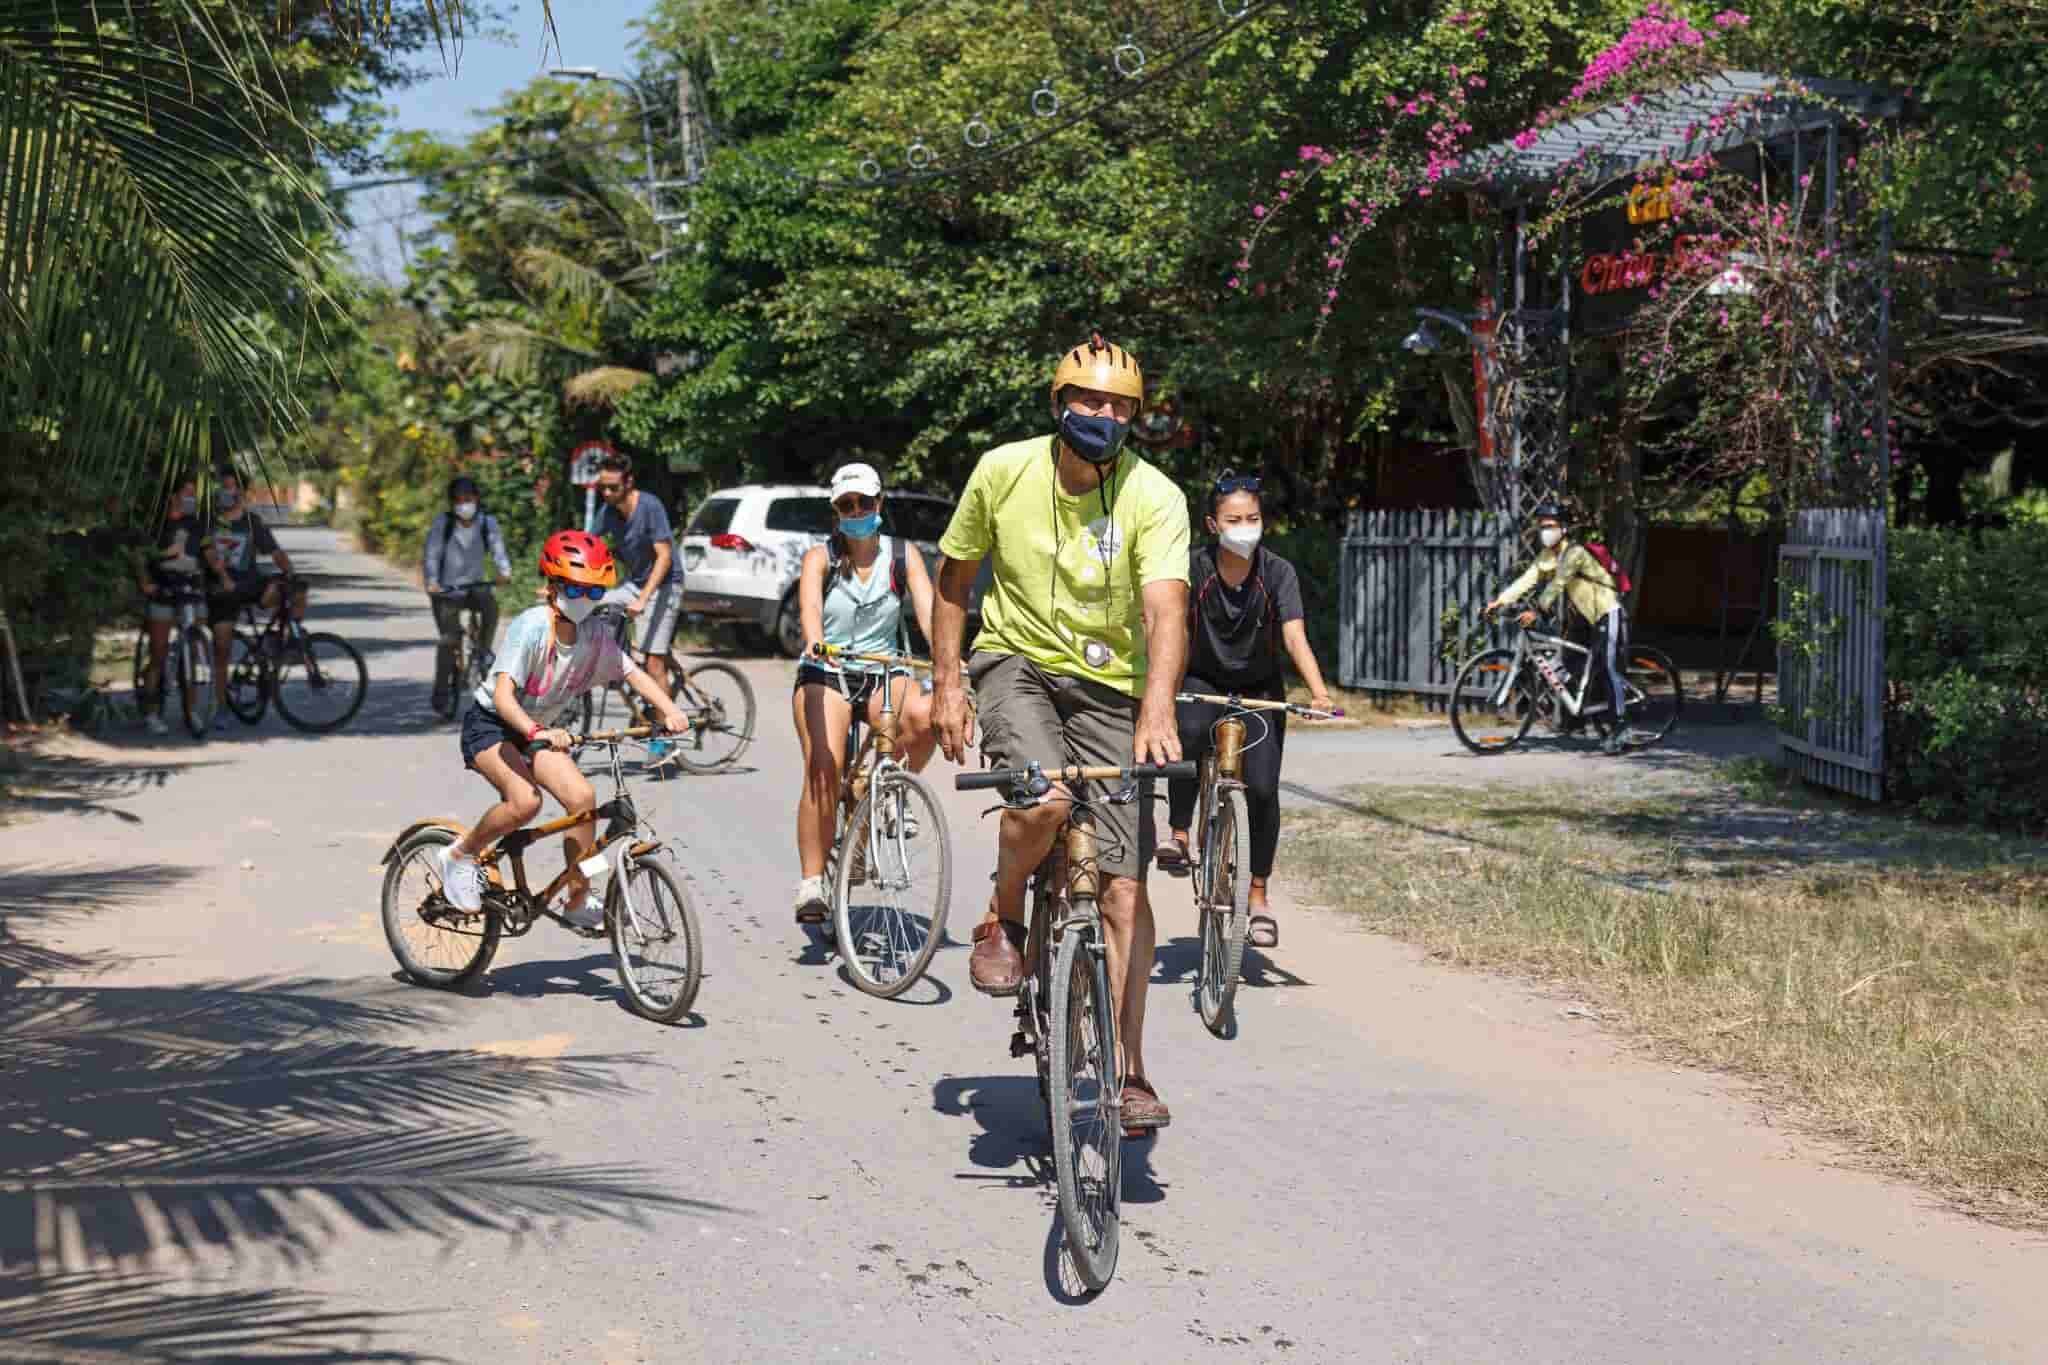 In recent months, as lockdowns eased, Mekong Quilts has also started running bicycle tours to the Mekong Delta, where visitors can get to know the communities behind the craft. Photo by Mervin Lee